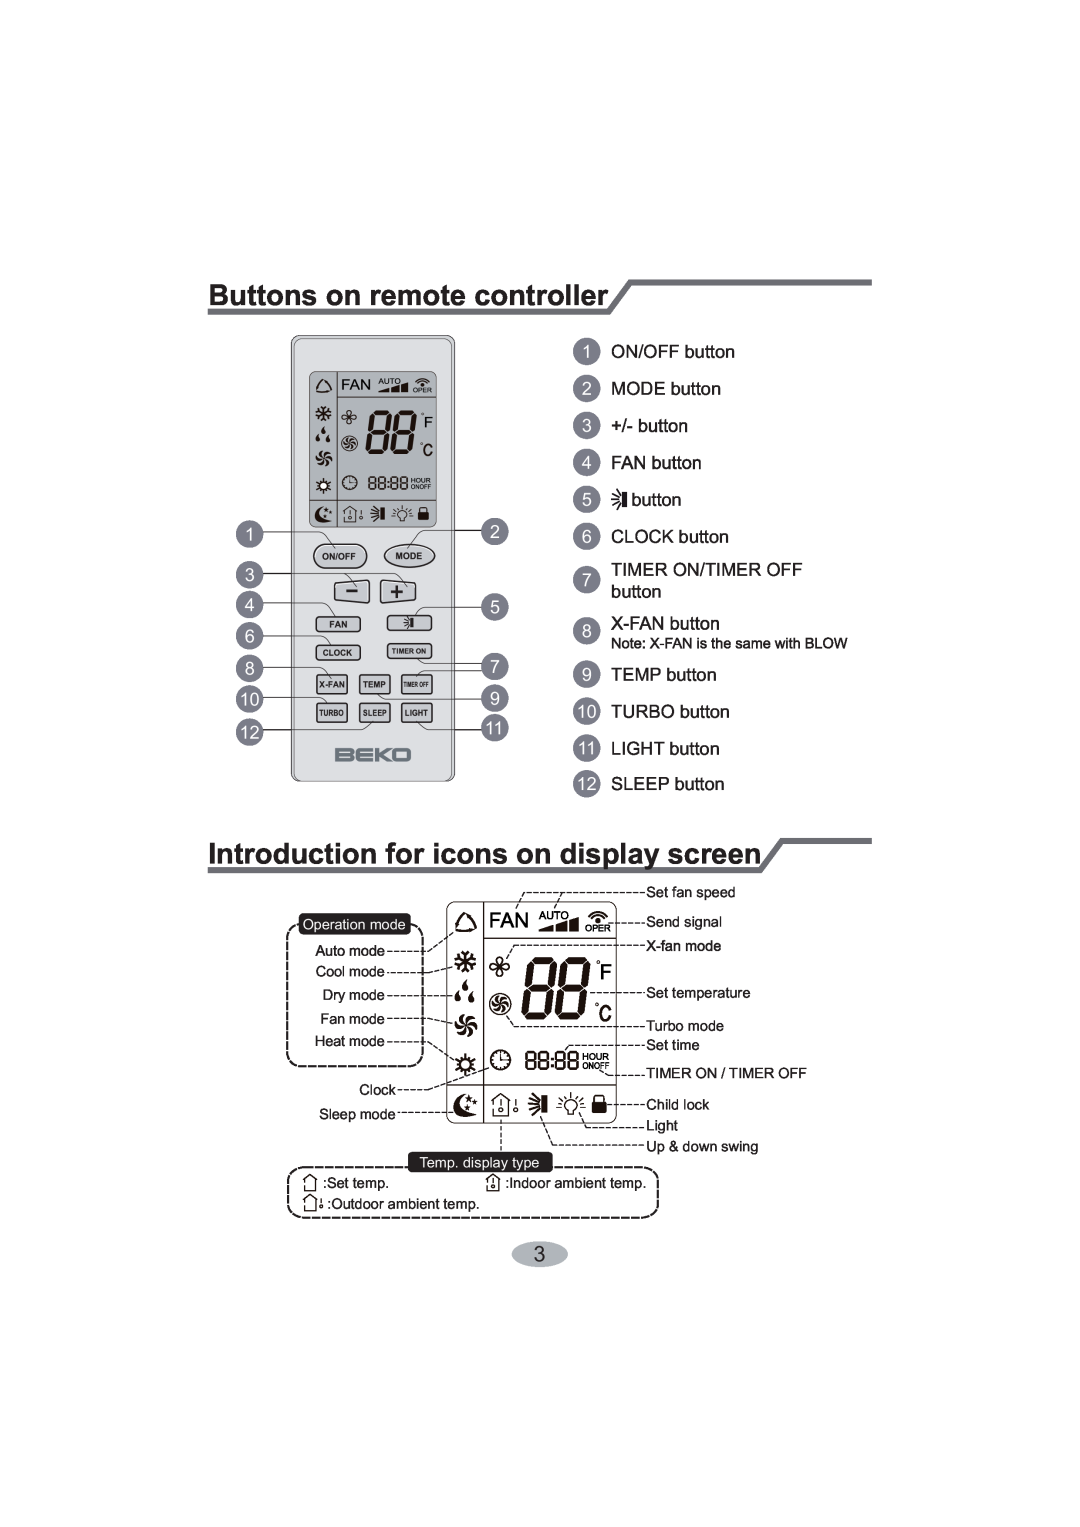 Beko BK 5200, BK 6300 user manual Buttons on remote controller, Introduction for icons on display screen 